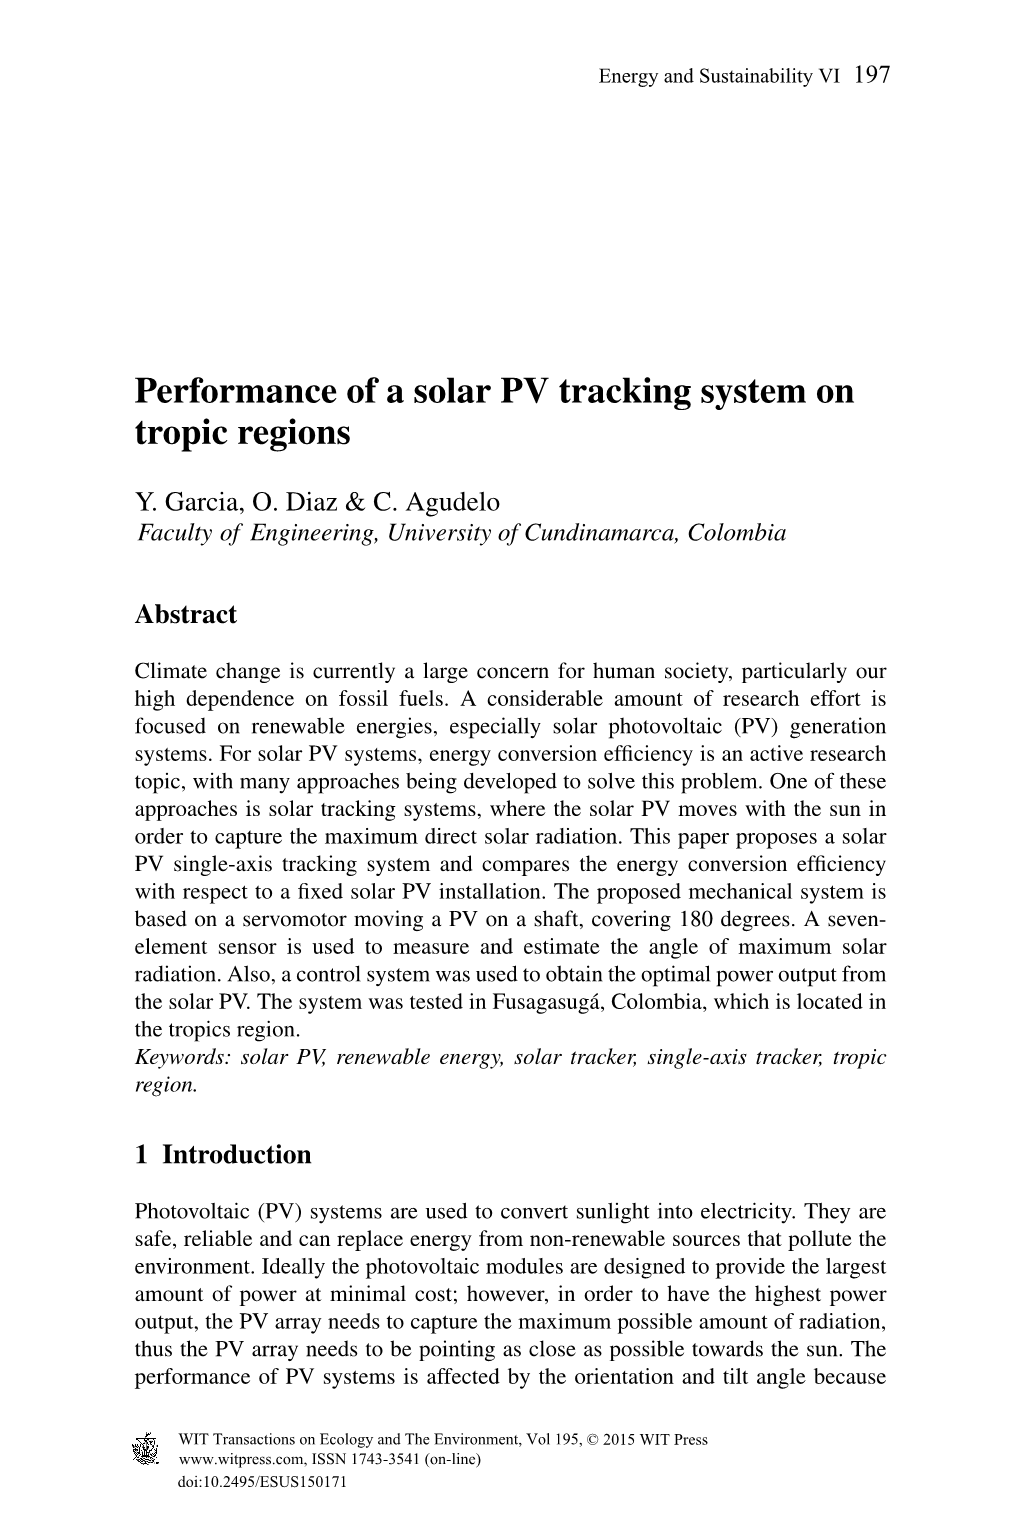 Performance of a Solar PV Tracking System on Tropic Regions